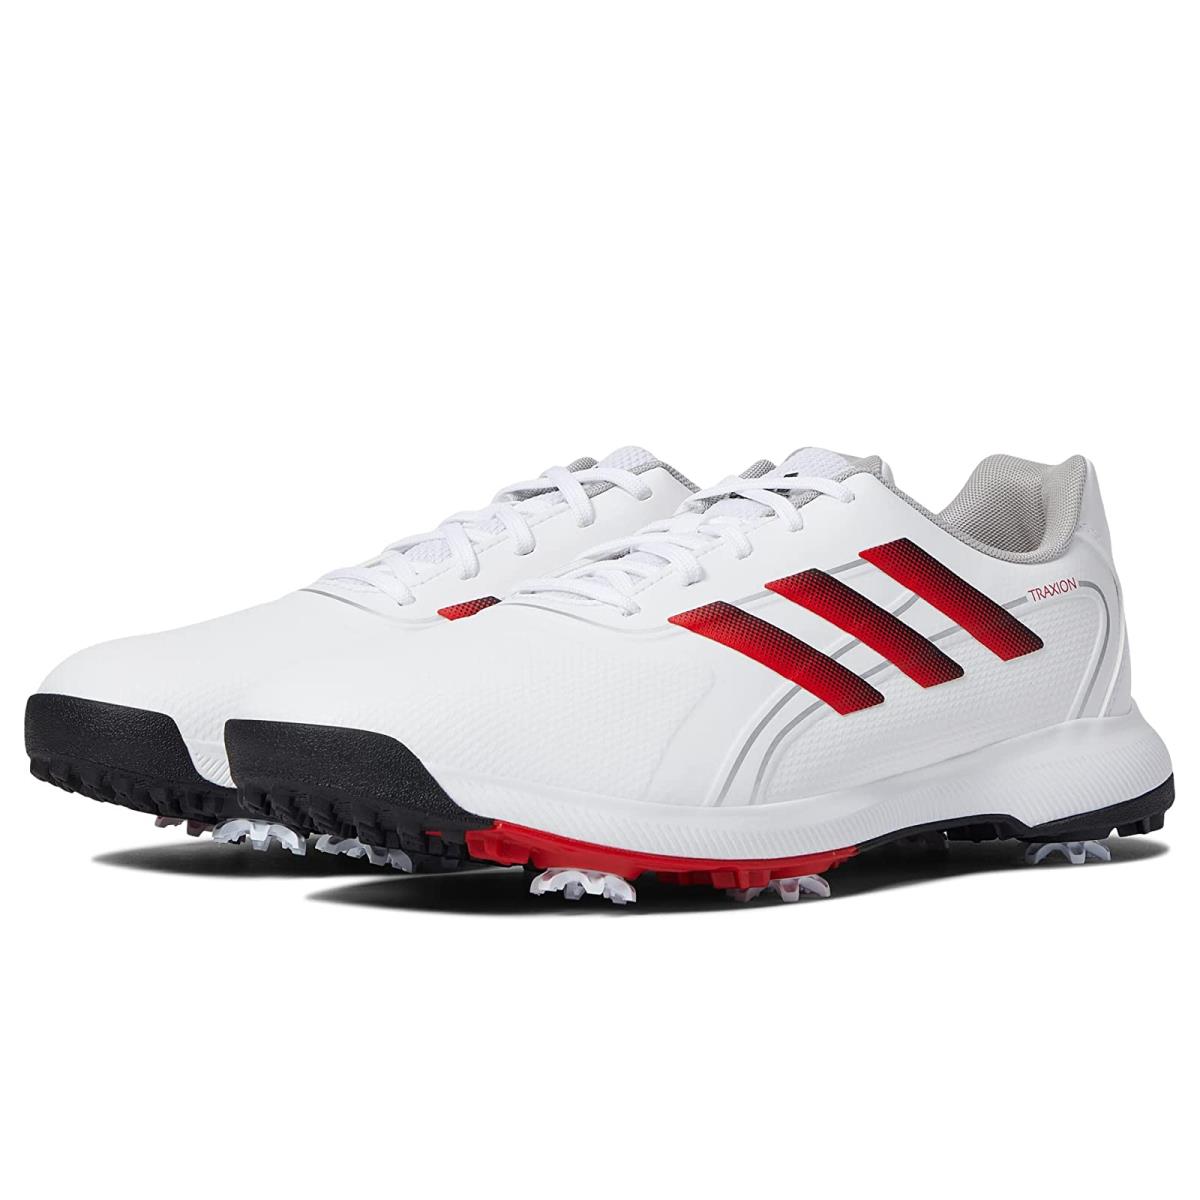 Man`s Sneakers Athletic Shoes Adidas Golf Traxion Lite Max Footwear White/Core Black/Vivid Red